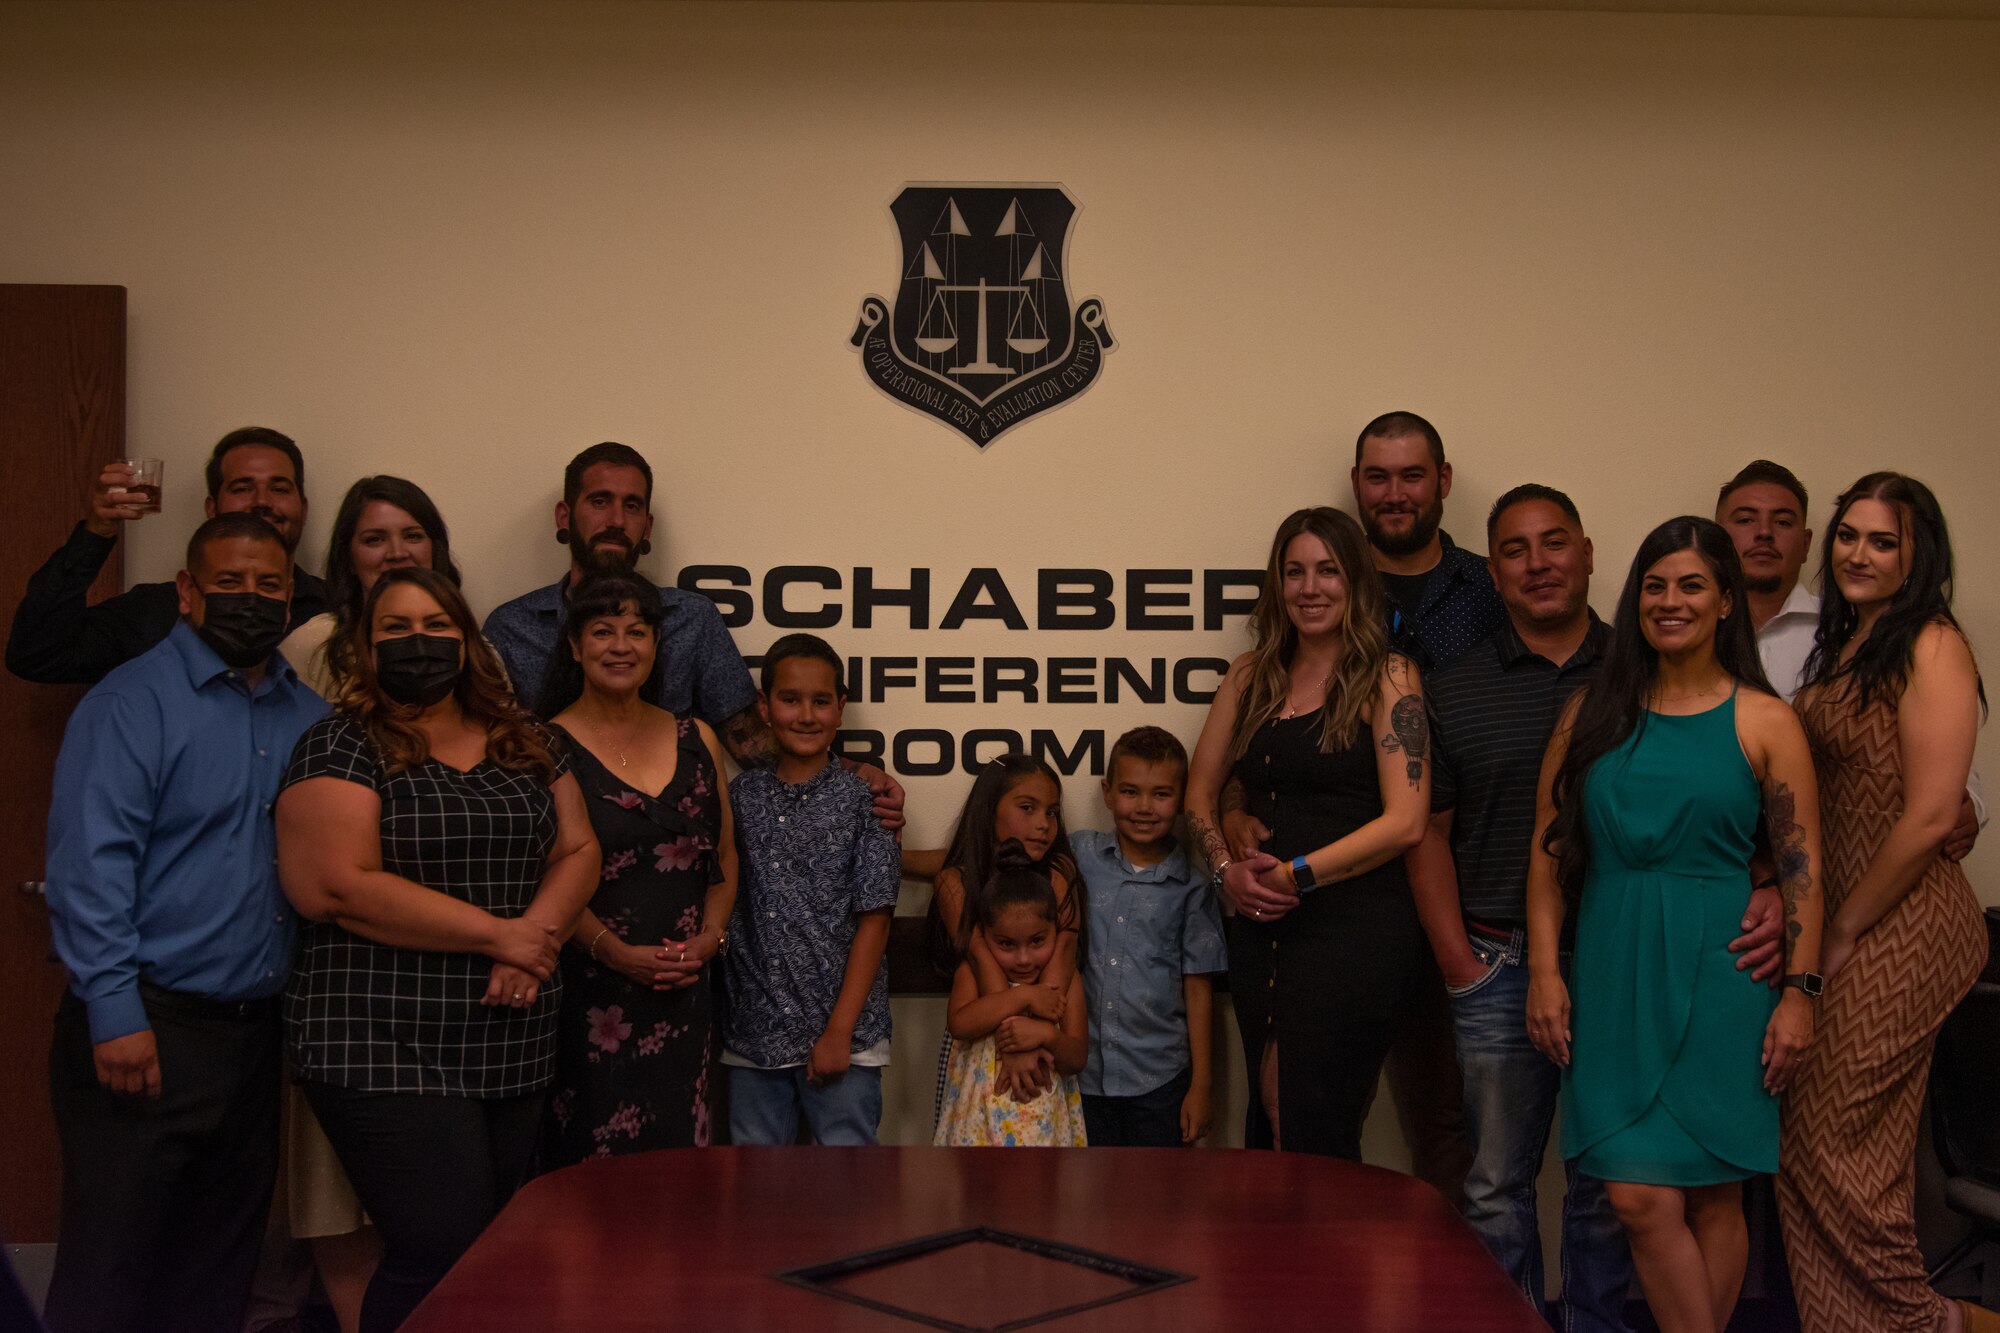 The Air Force Operational Test and Evaluation Center dedicated the Grant D. Schaber Conference Room on June 3, 2022 at its headquarters. Members of the Schaber family, including Schaber’s wife Christina and all his sons and daughters, attended the ceremony. The Air Force Memorialization Program recognizes military and civilian members who have provided outstanding service to their country.